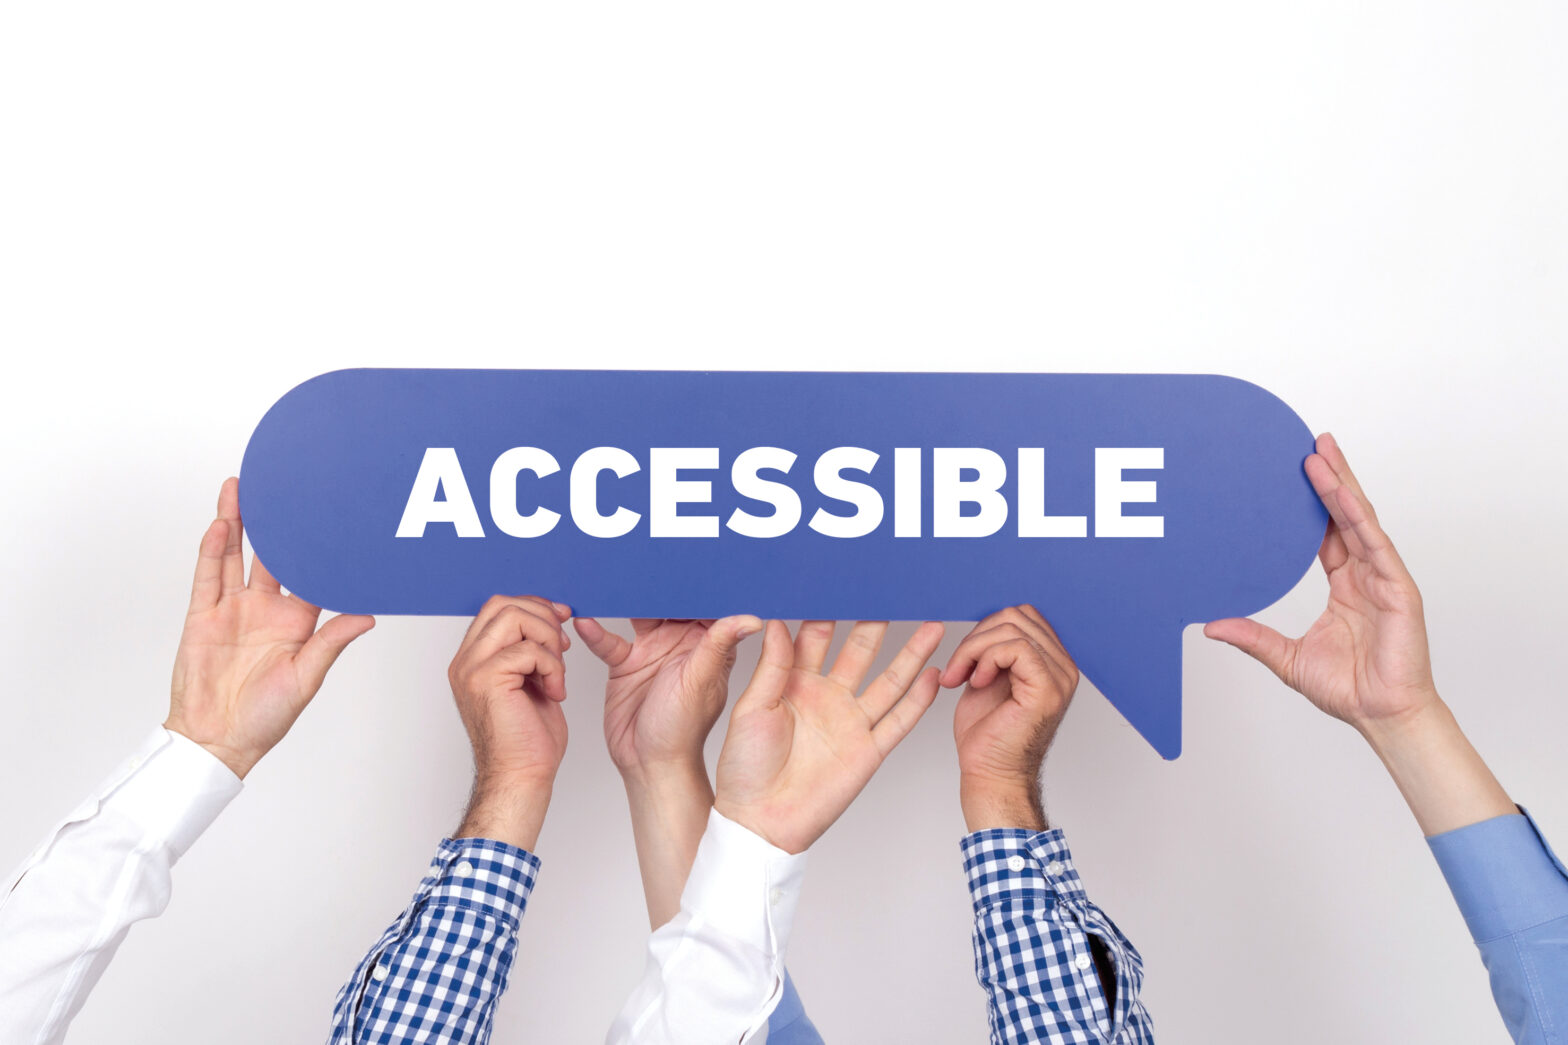 several hands holding up a sign with the inscription "accessible"